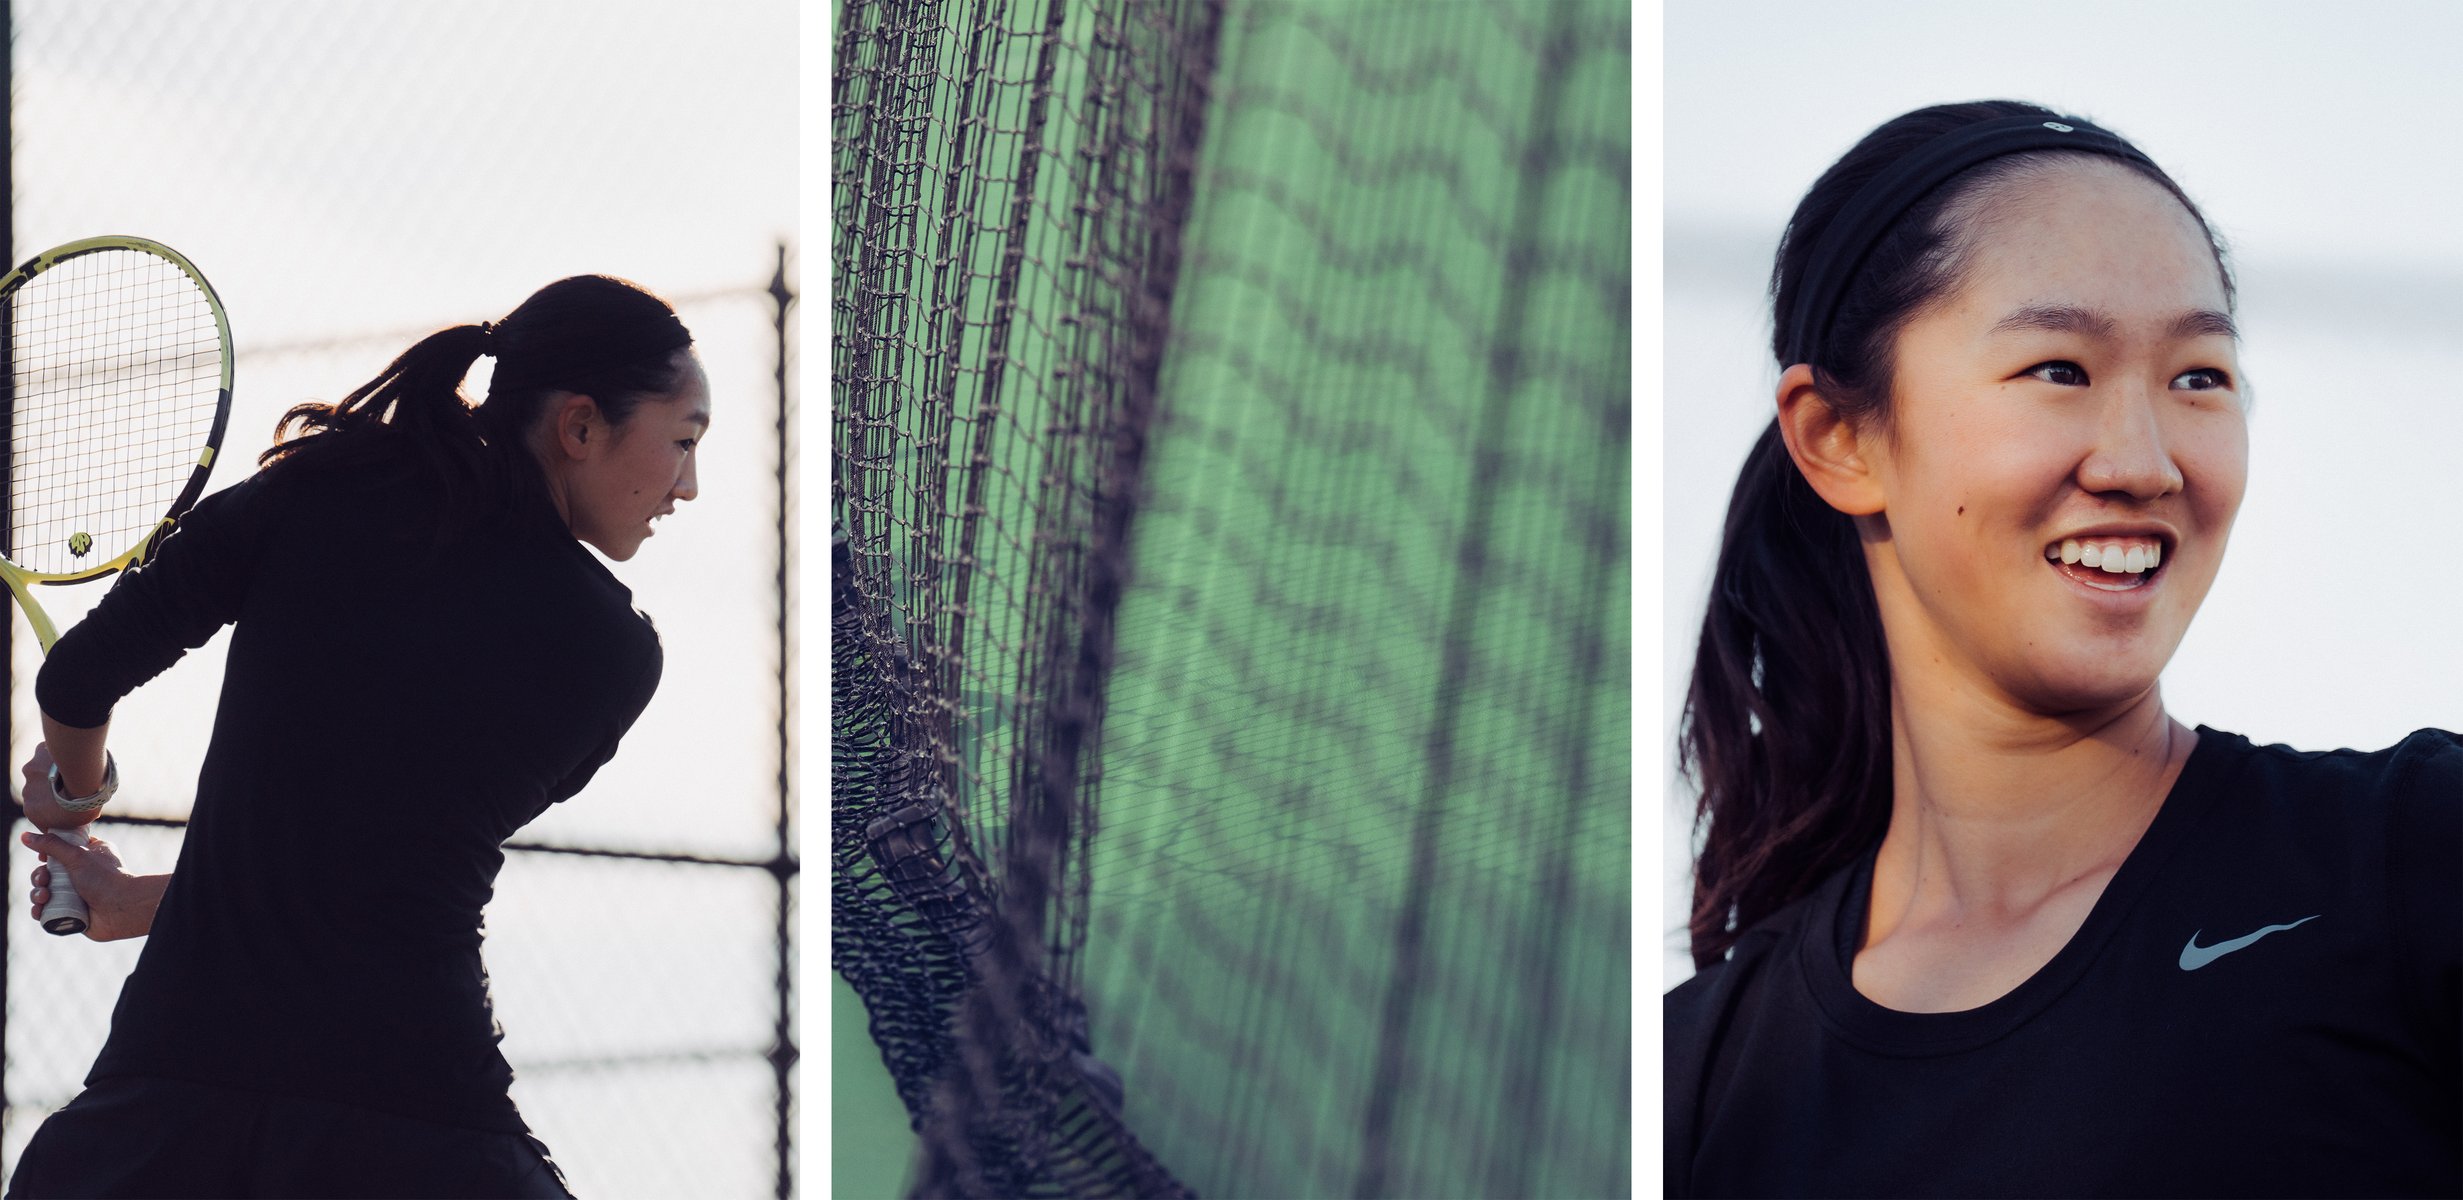  Triptych:

Left image: a tennis player with long, black hair, who is silhouetted against a chain link fence and a bright white sky, and is reaching back in a swing with her racquet.

Center image: a close-up image of a tennis court net that is dragging against the green court floor.

Right image: an image of Connie Ma with her hair tied back and smiling against a bright, white sky. by Sydney SG